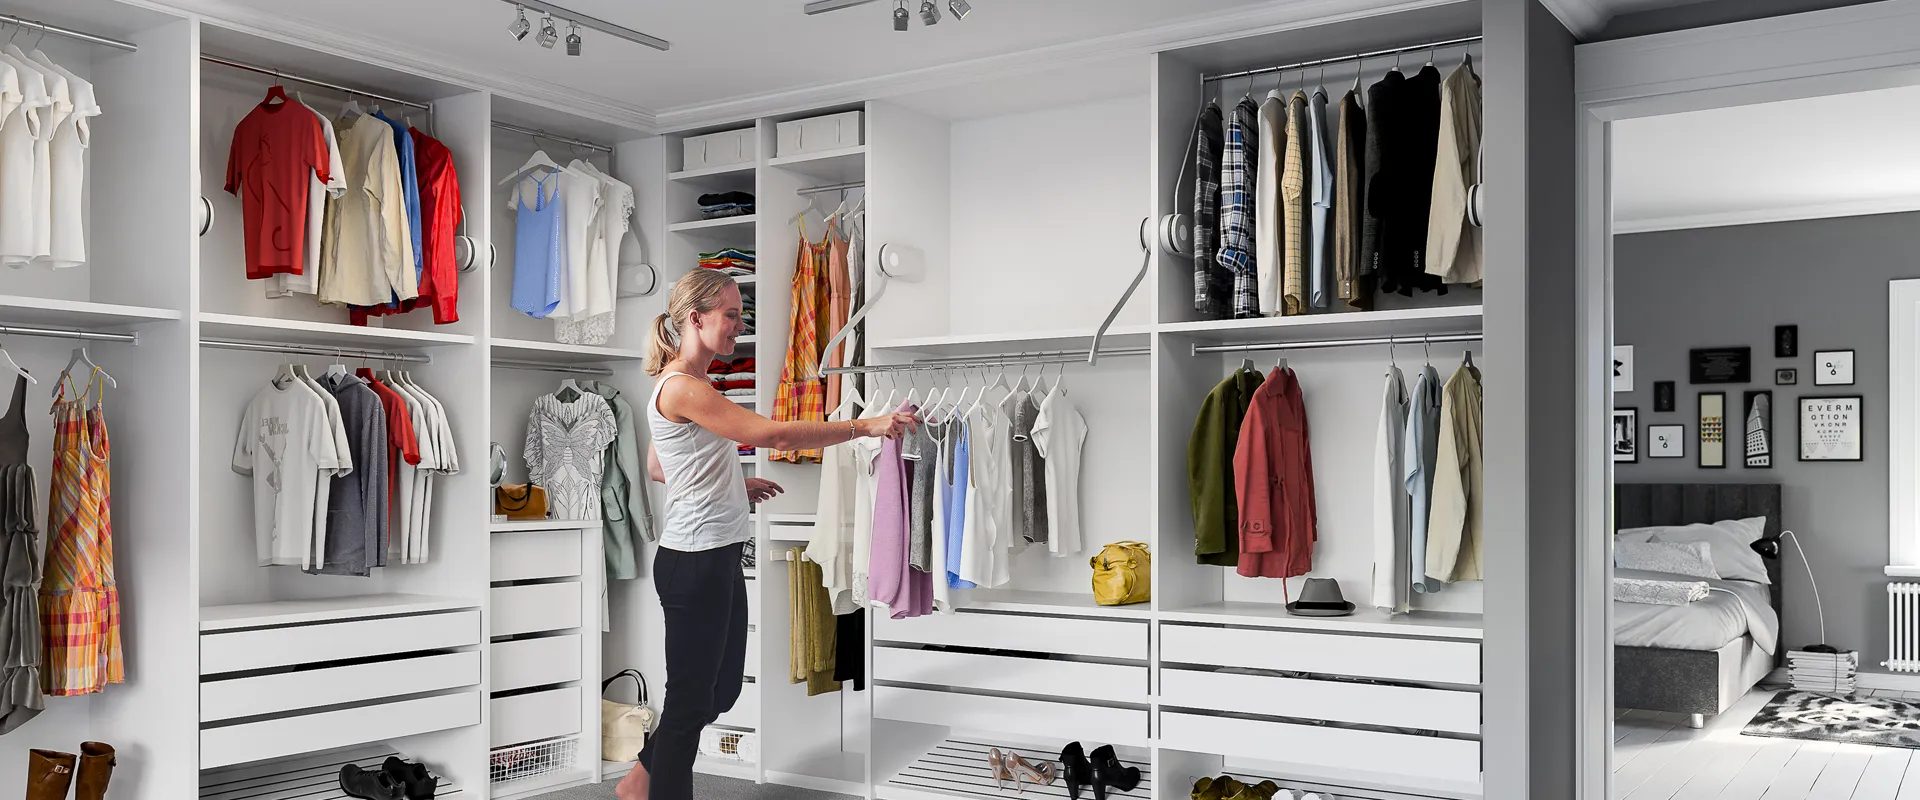 Maximising storage in your walk-in wardrobe with an adjustable clothes rail